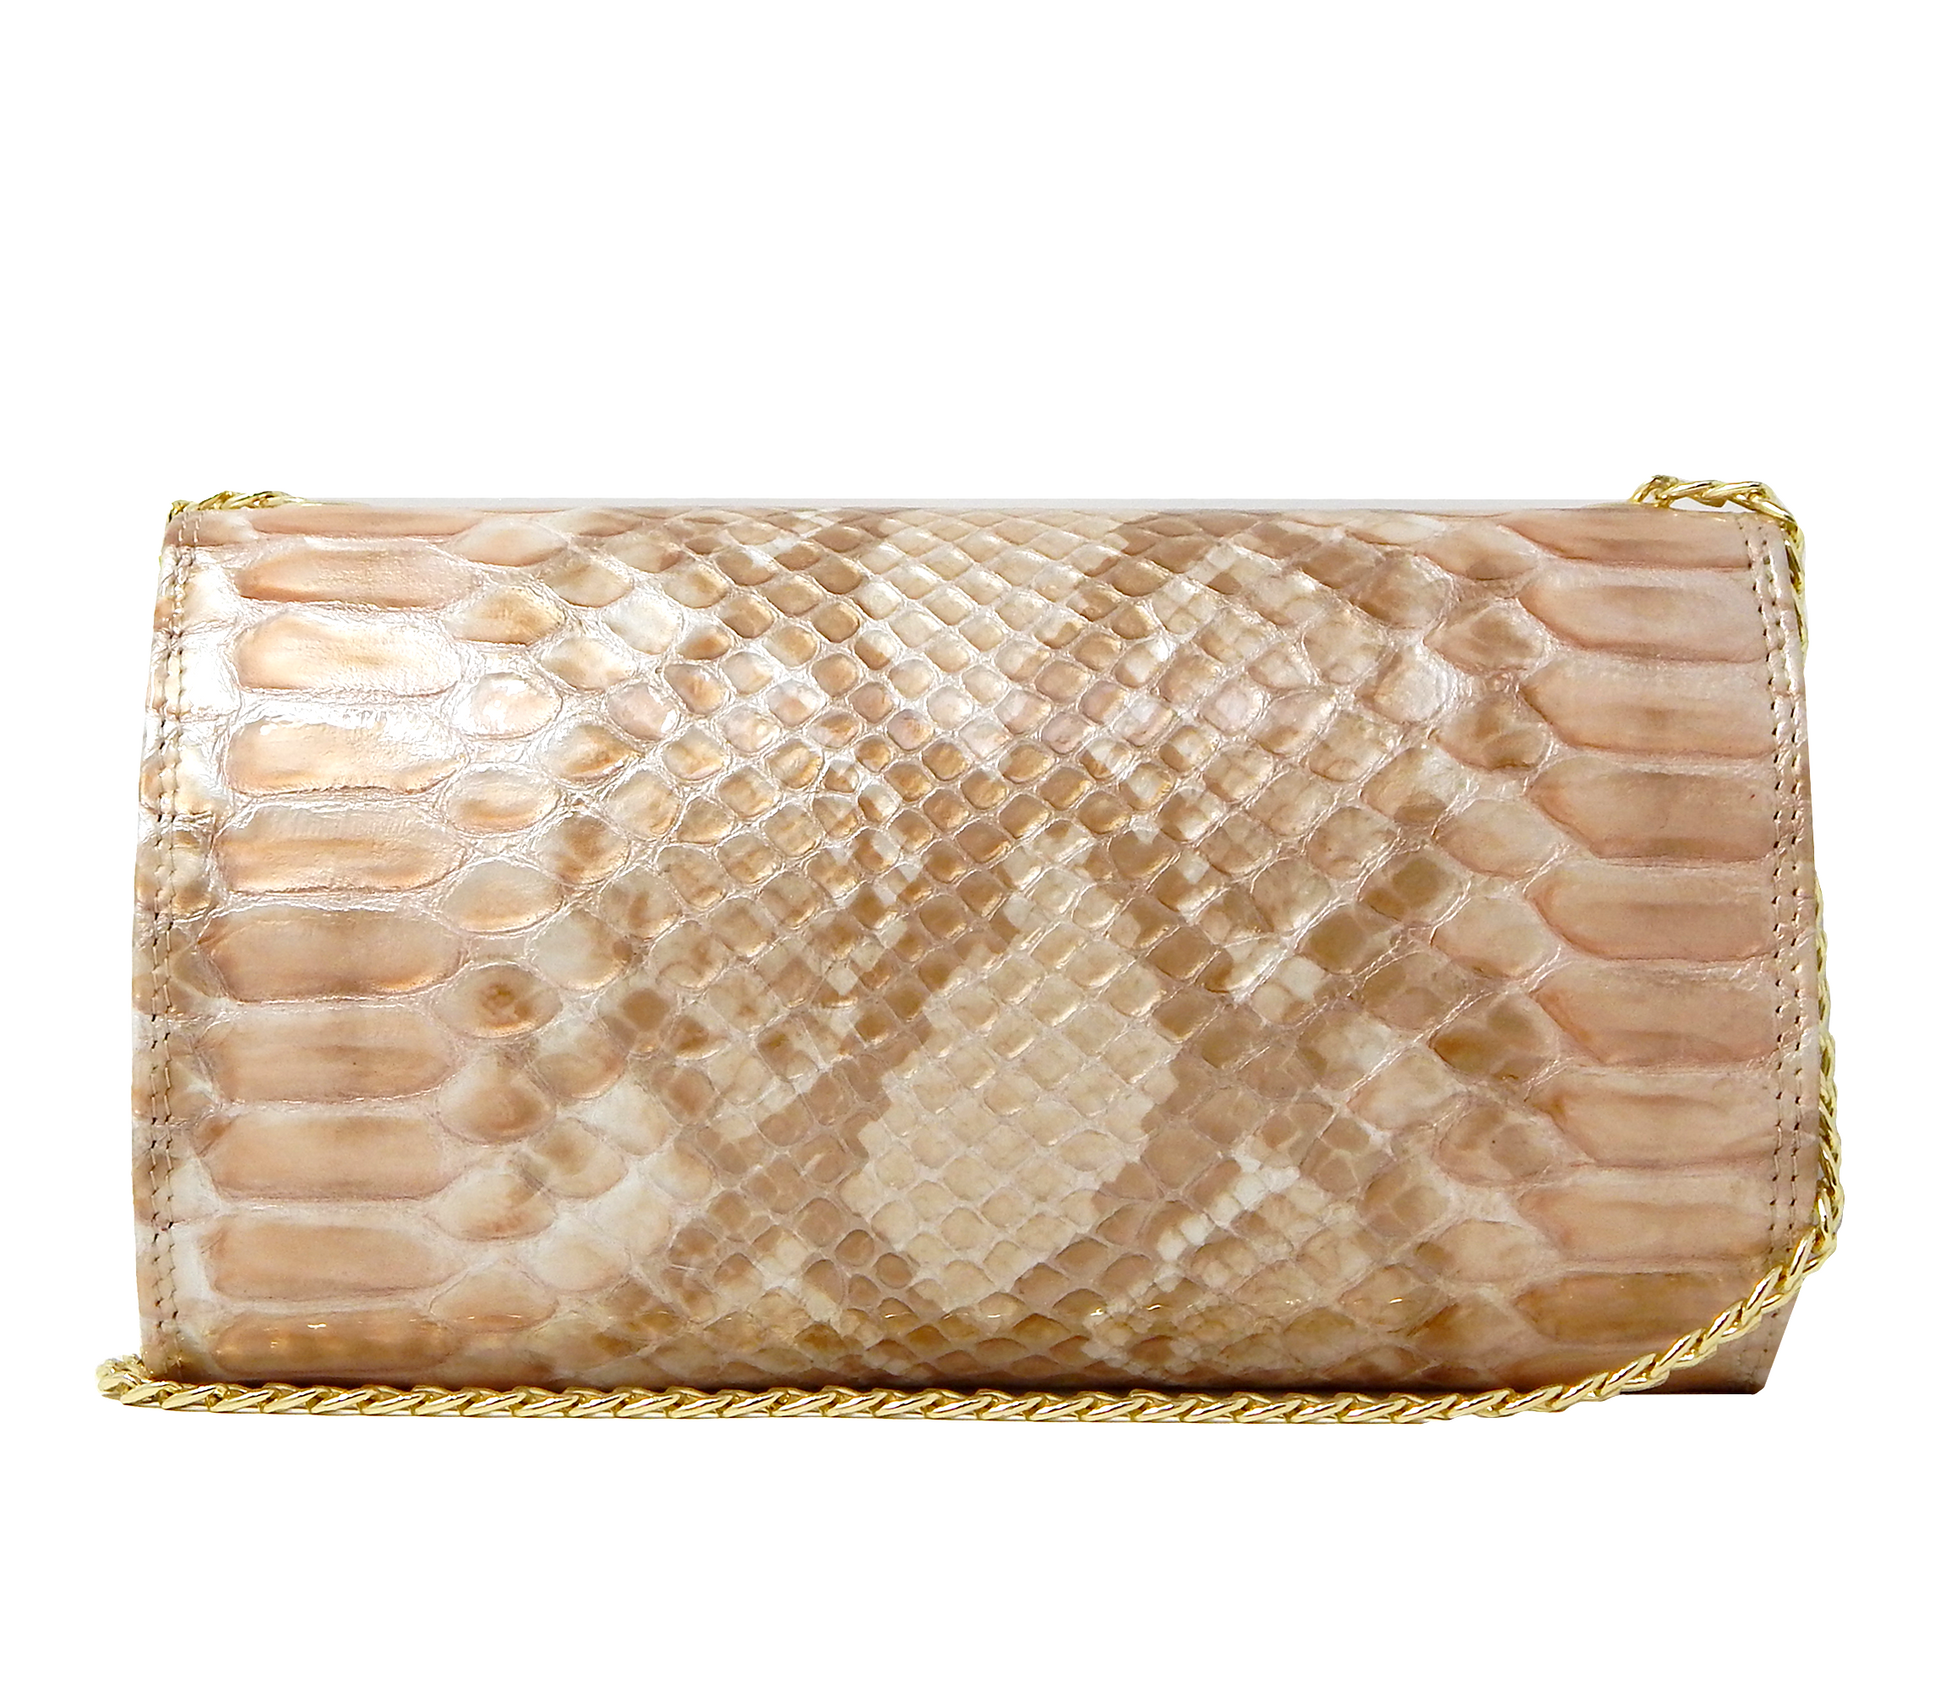 Cavalinho All In Patent Leather Clutch or Shoulder Bag - Beige / White - 18090491_05_3